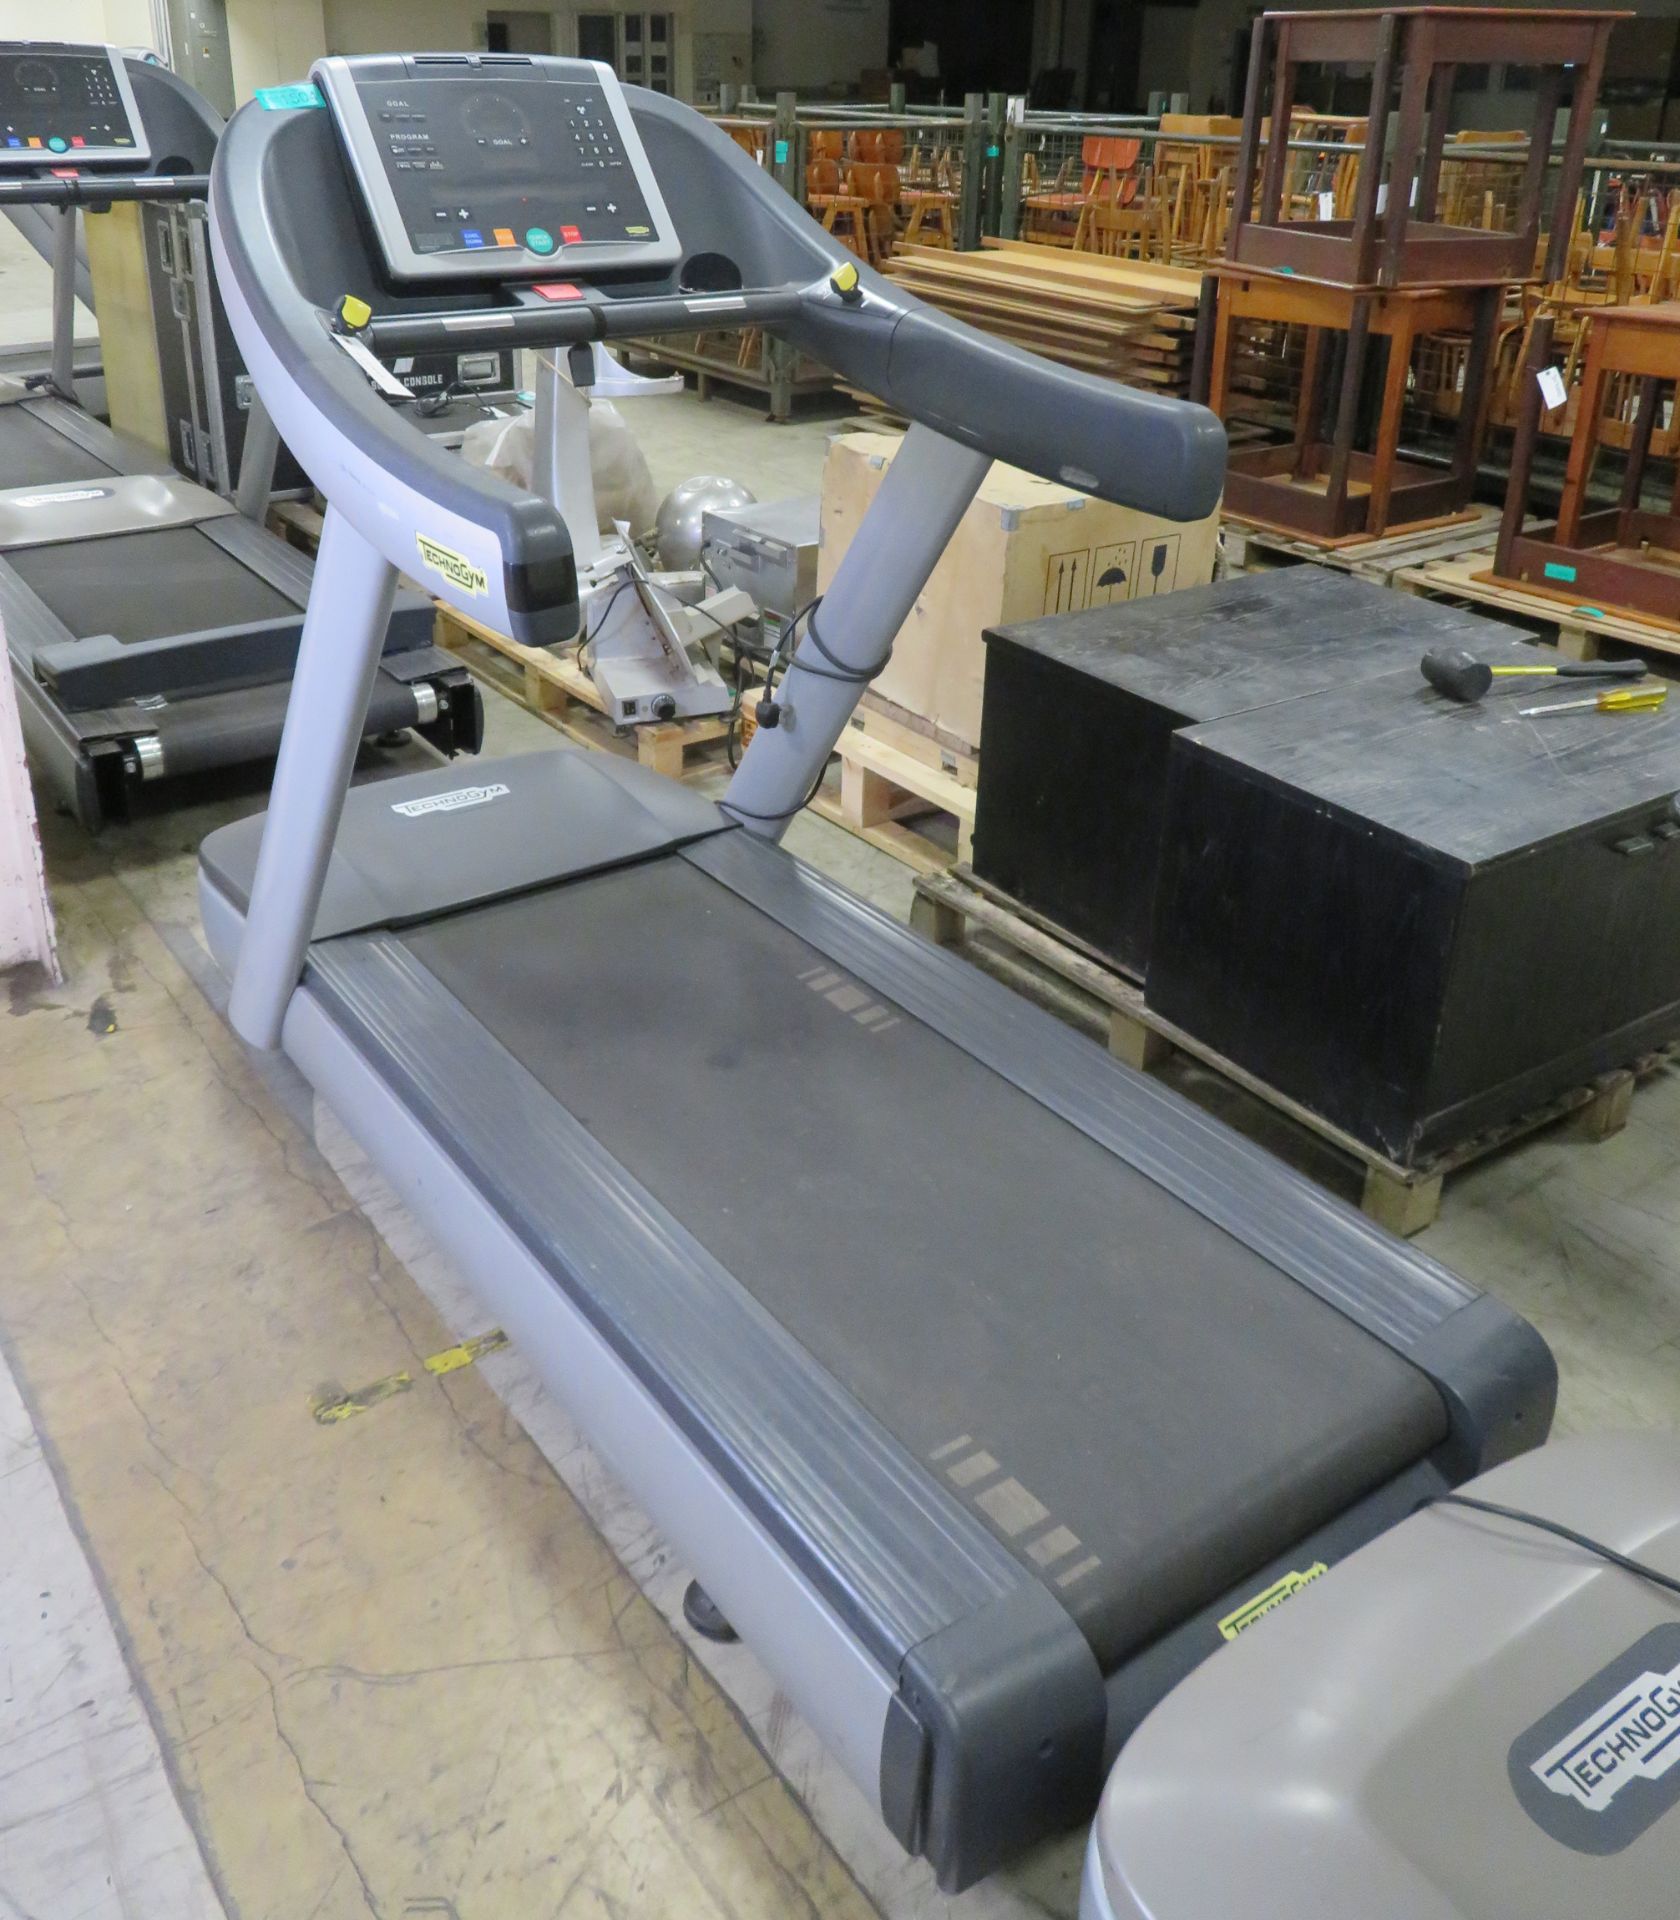 TechnoGym Excite Run Now 700 Treadmill With LCD Console - Image 2 of 4